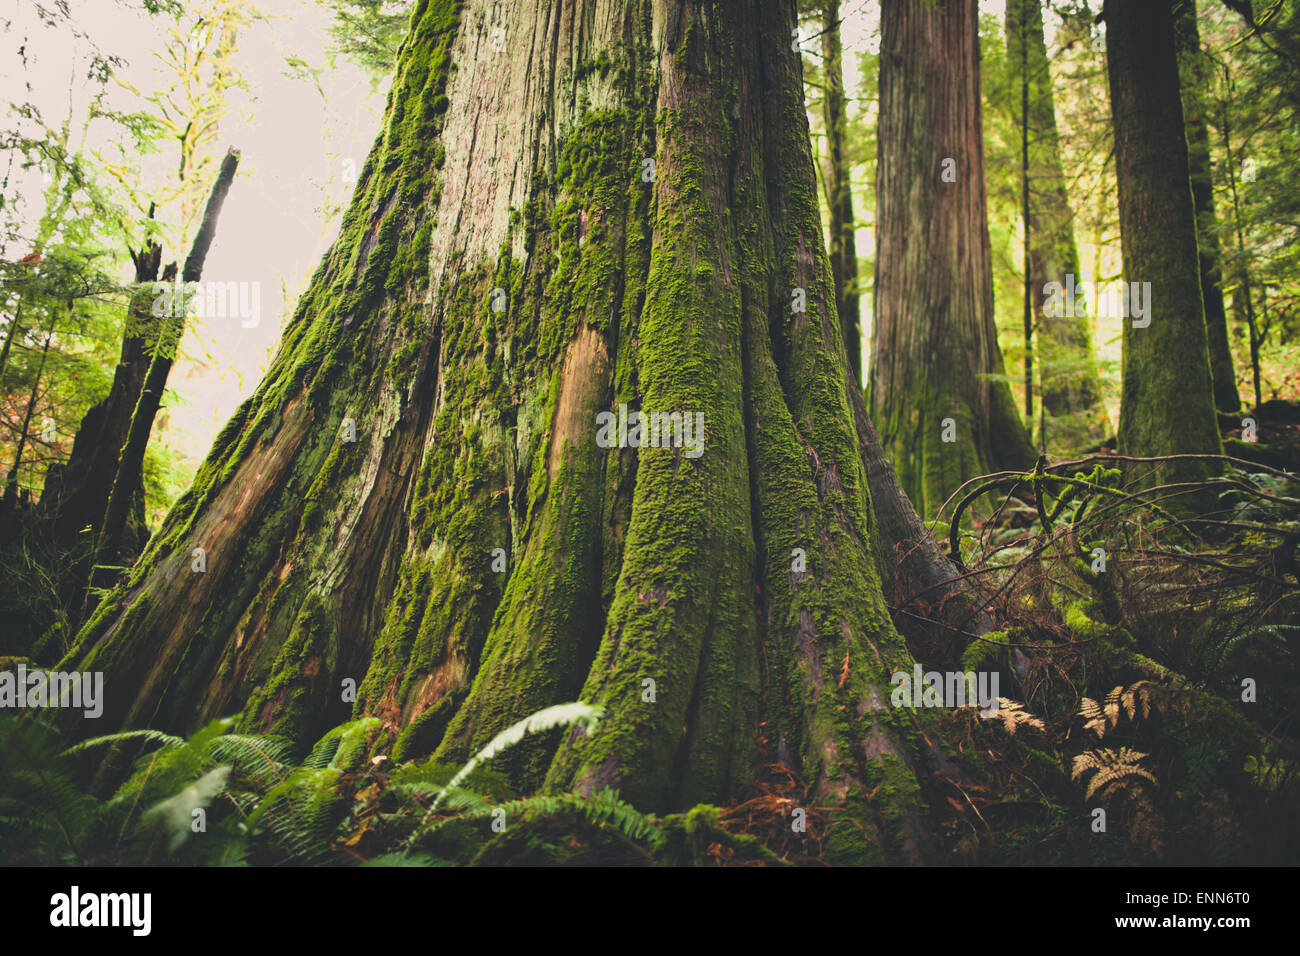 Old growth forest in British Columbia, Canada. Stock Photo